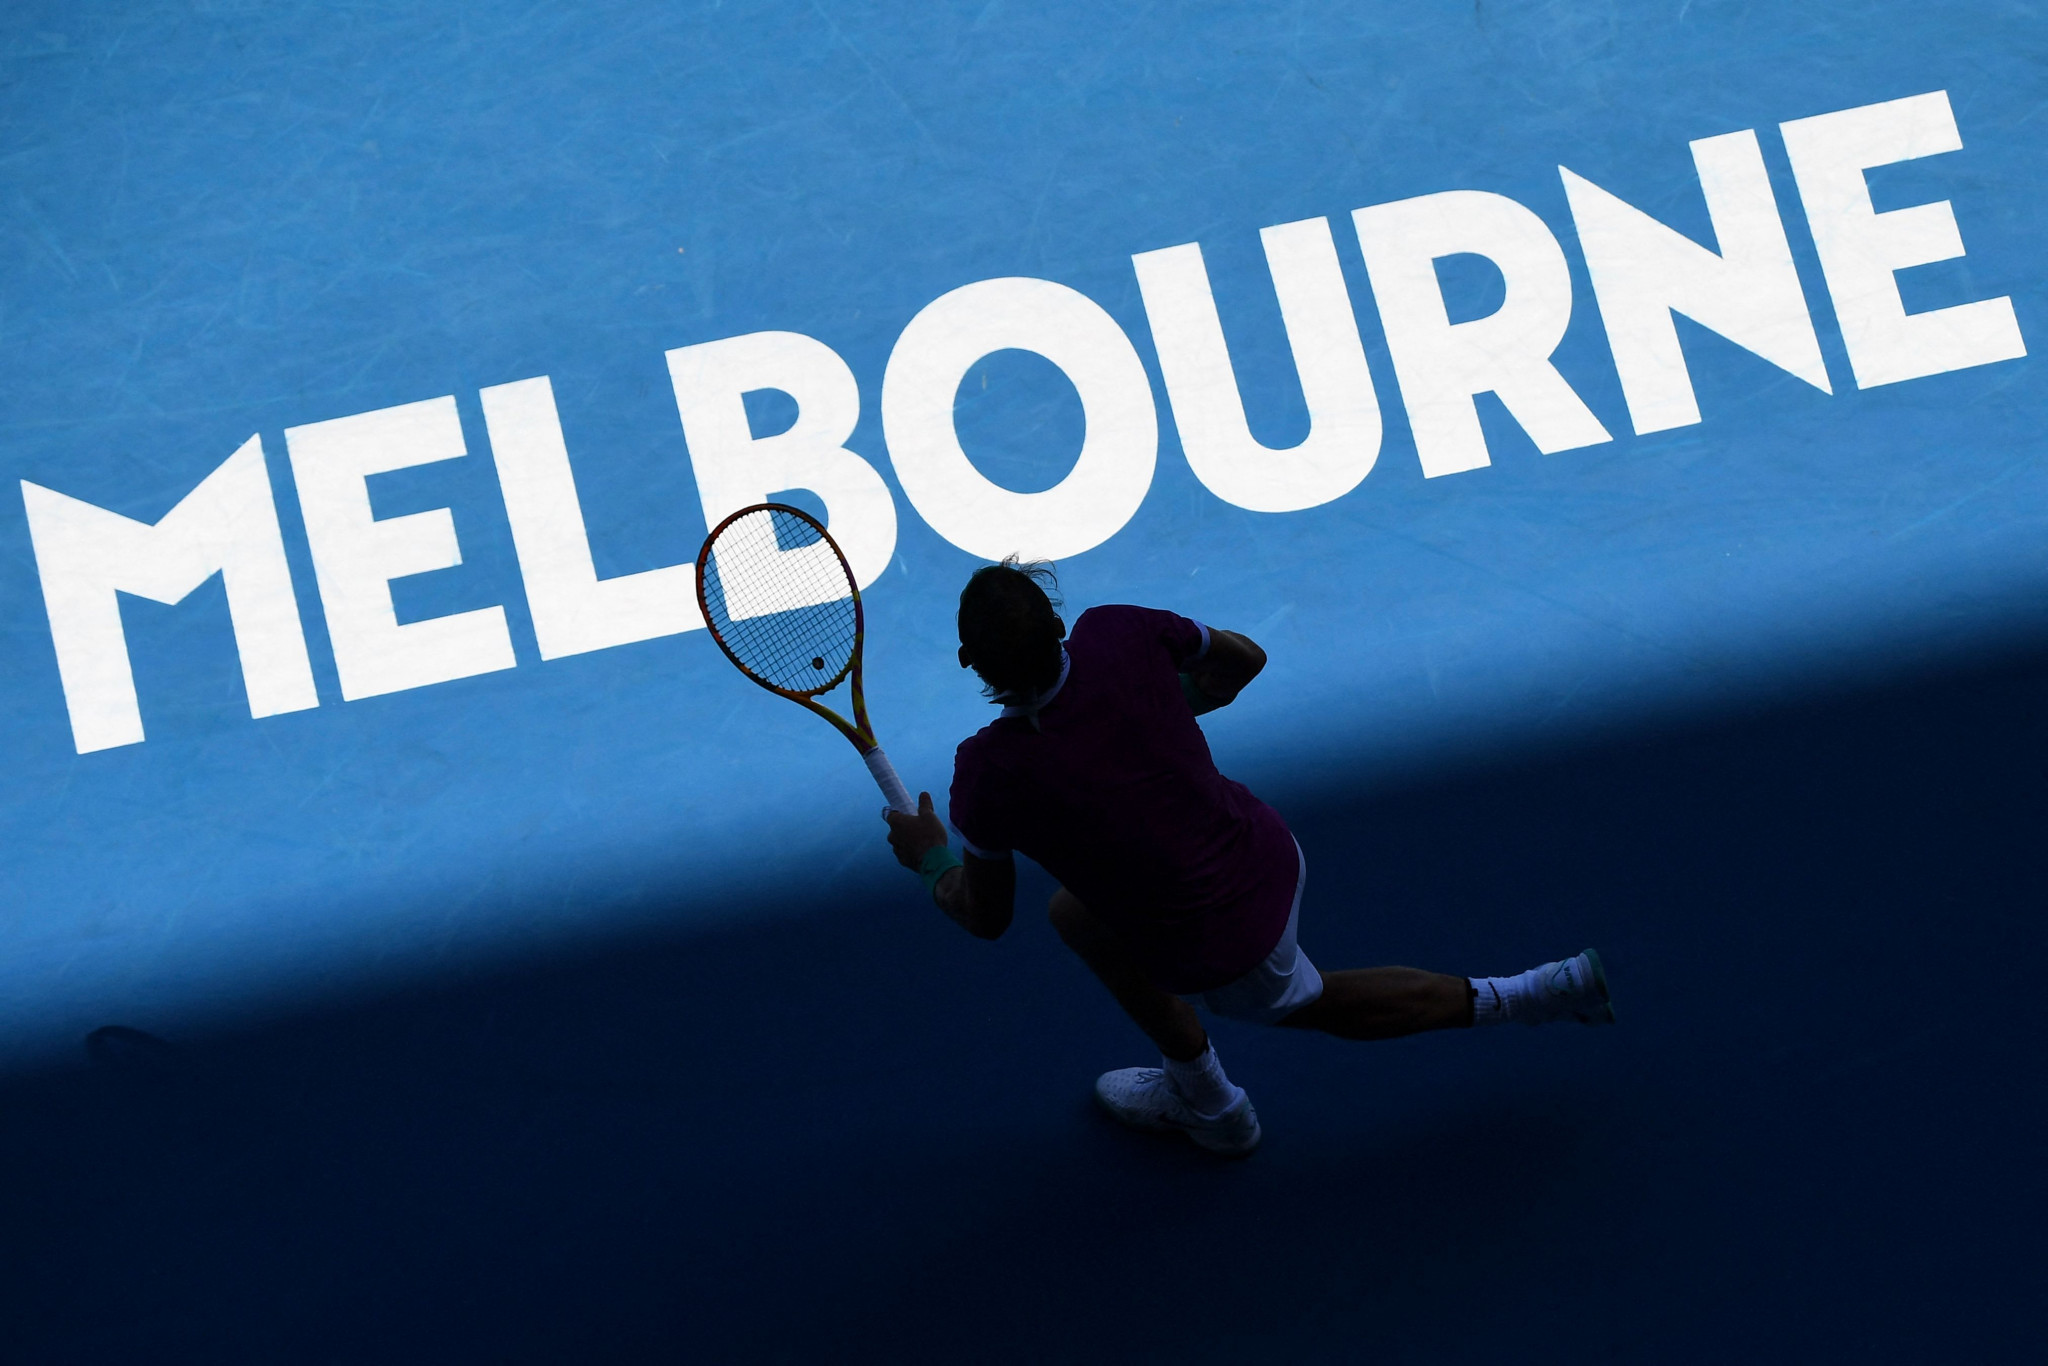 Australian Open director dismisses suggestions to move tournament date